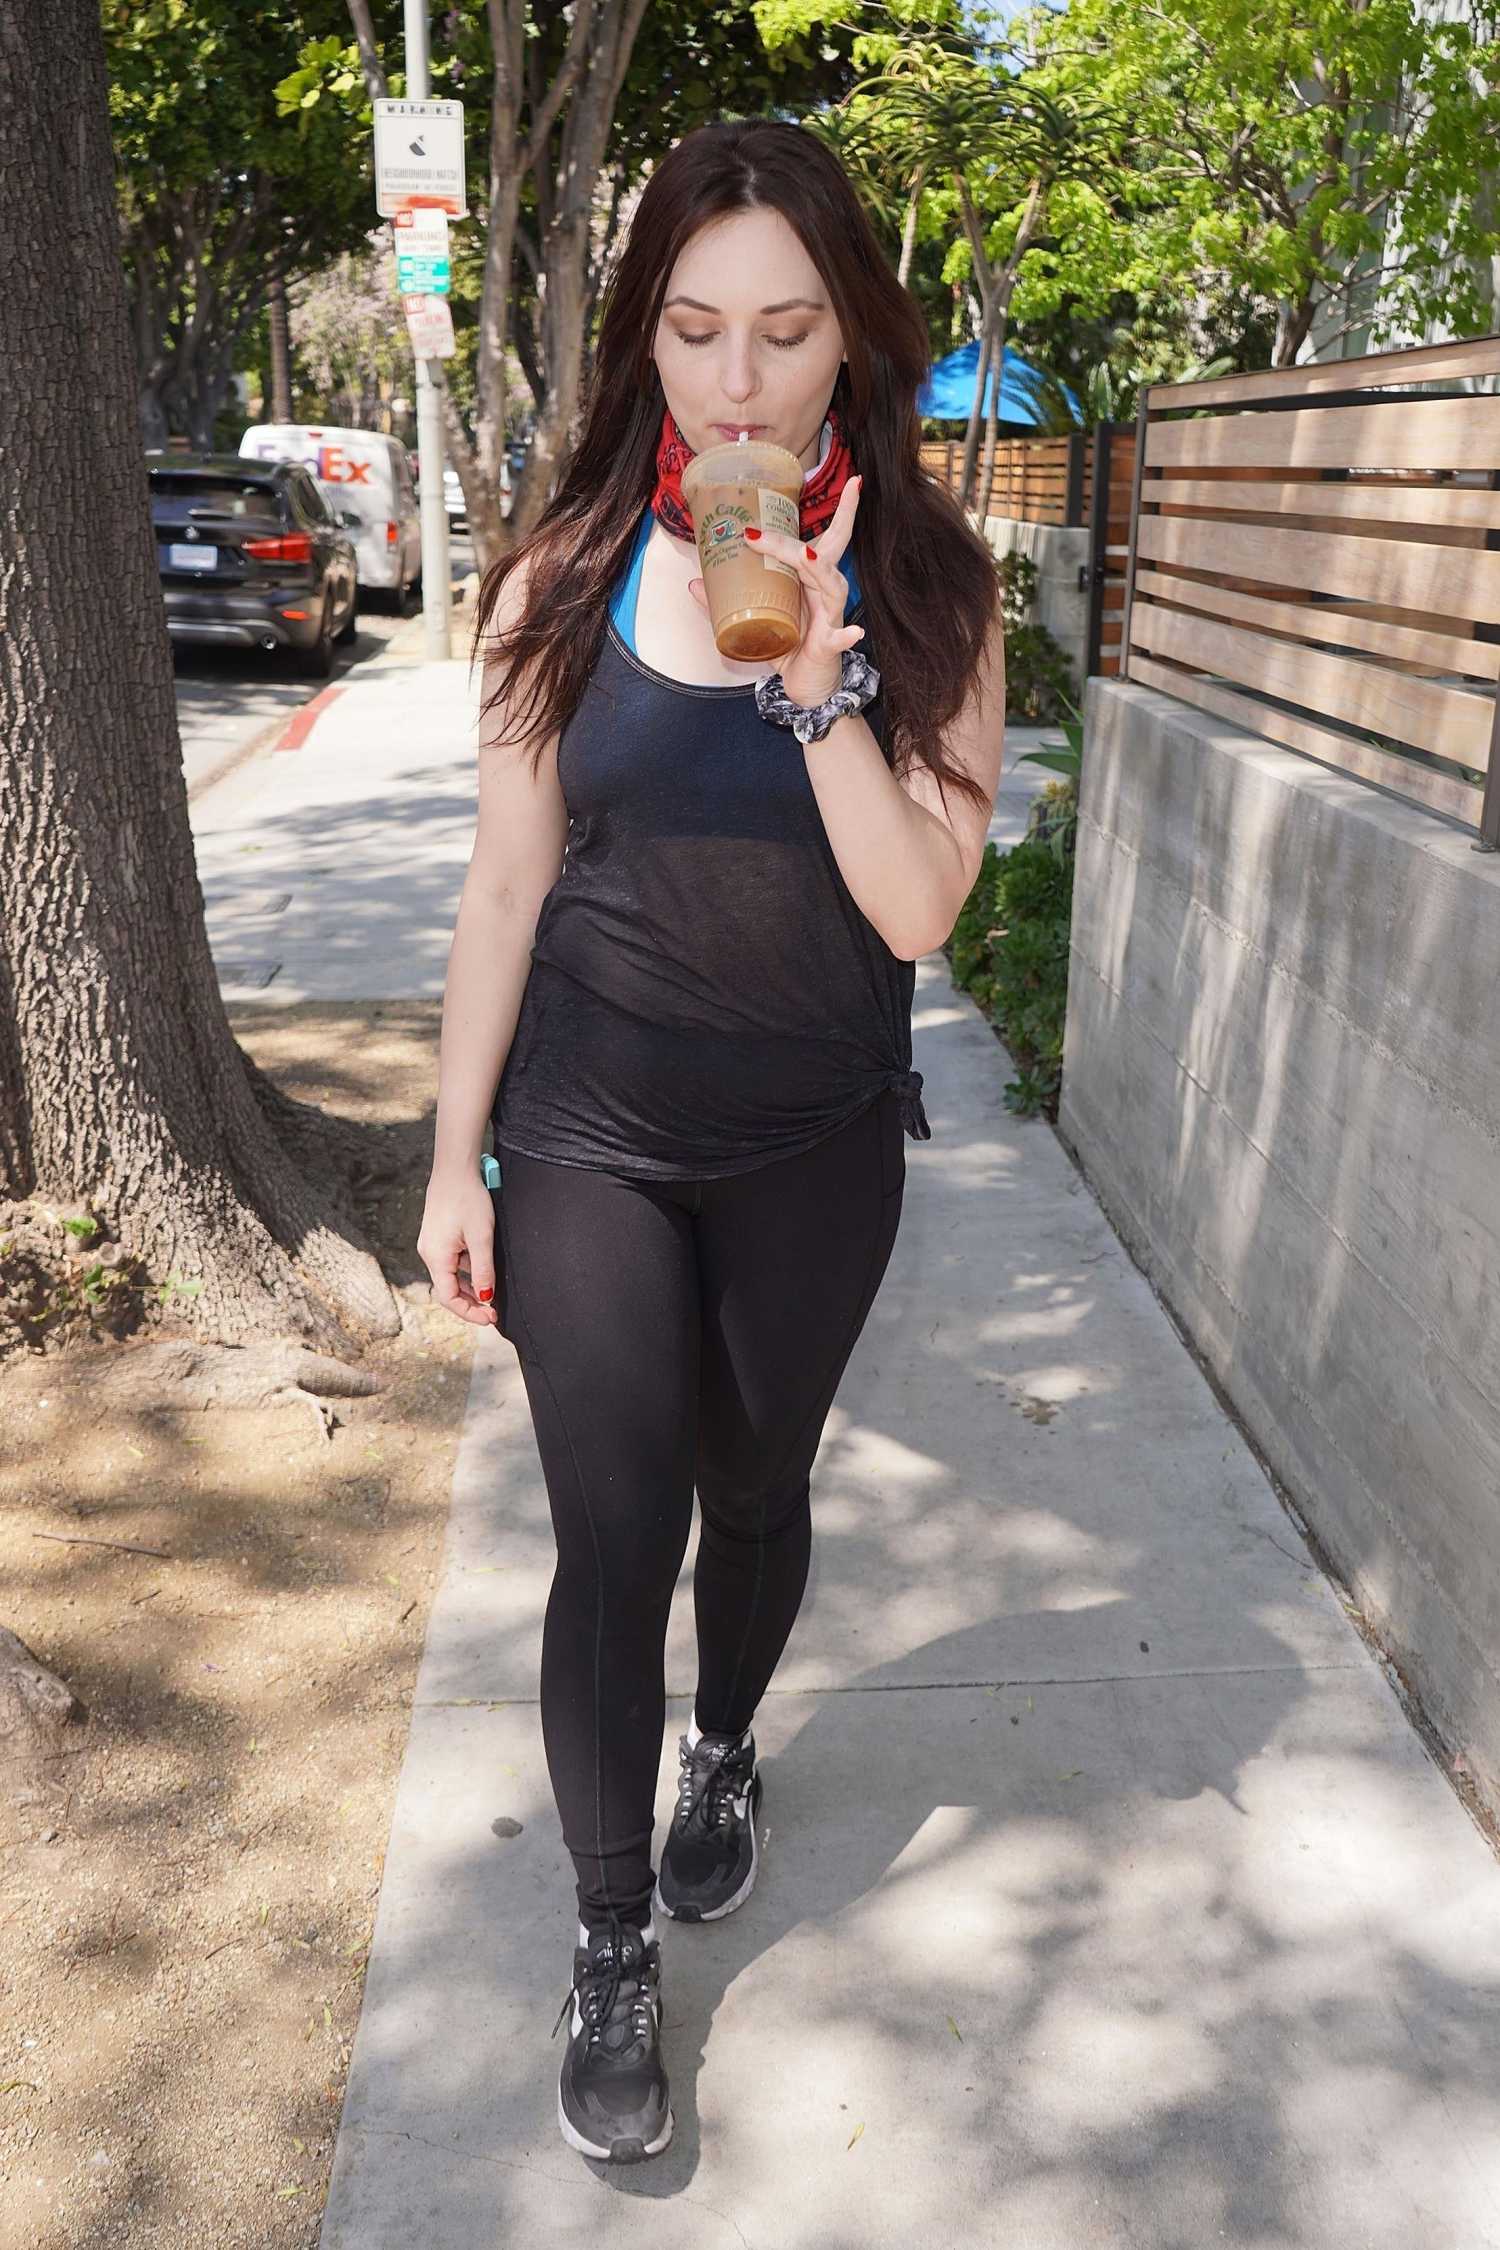 Ariel Teal Toombs in a Black Leggings Gets an Iced Coffee from Urth